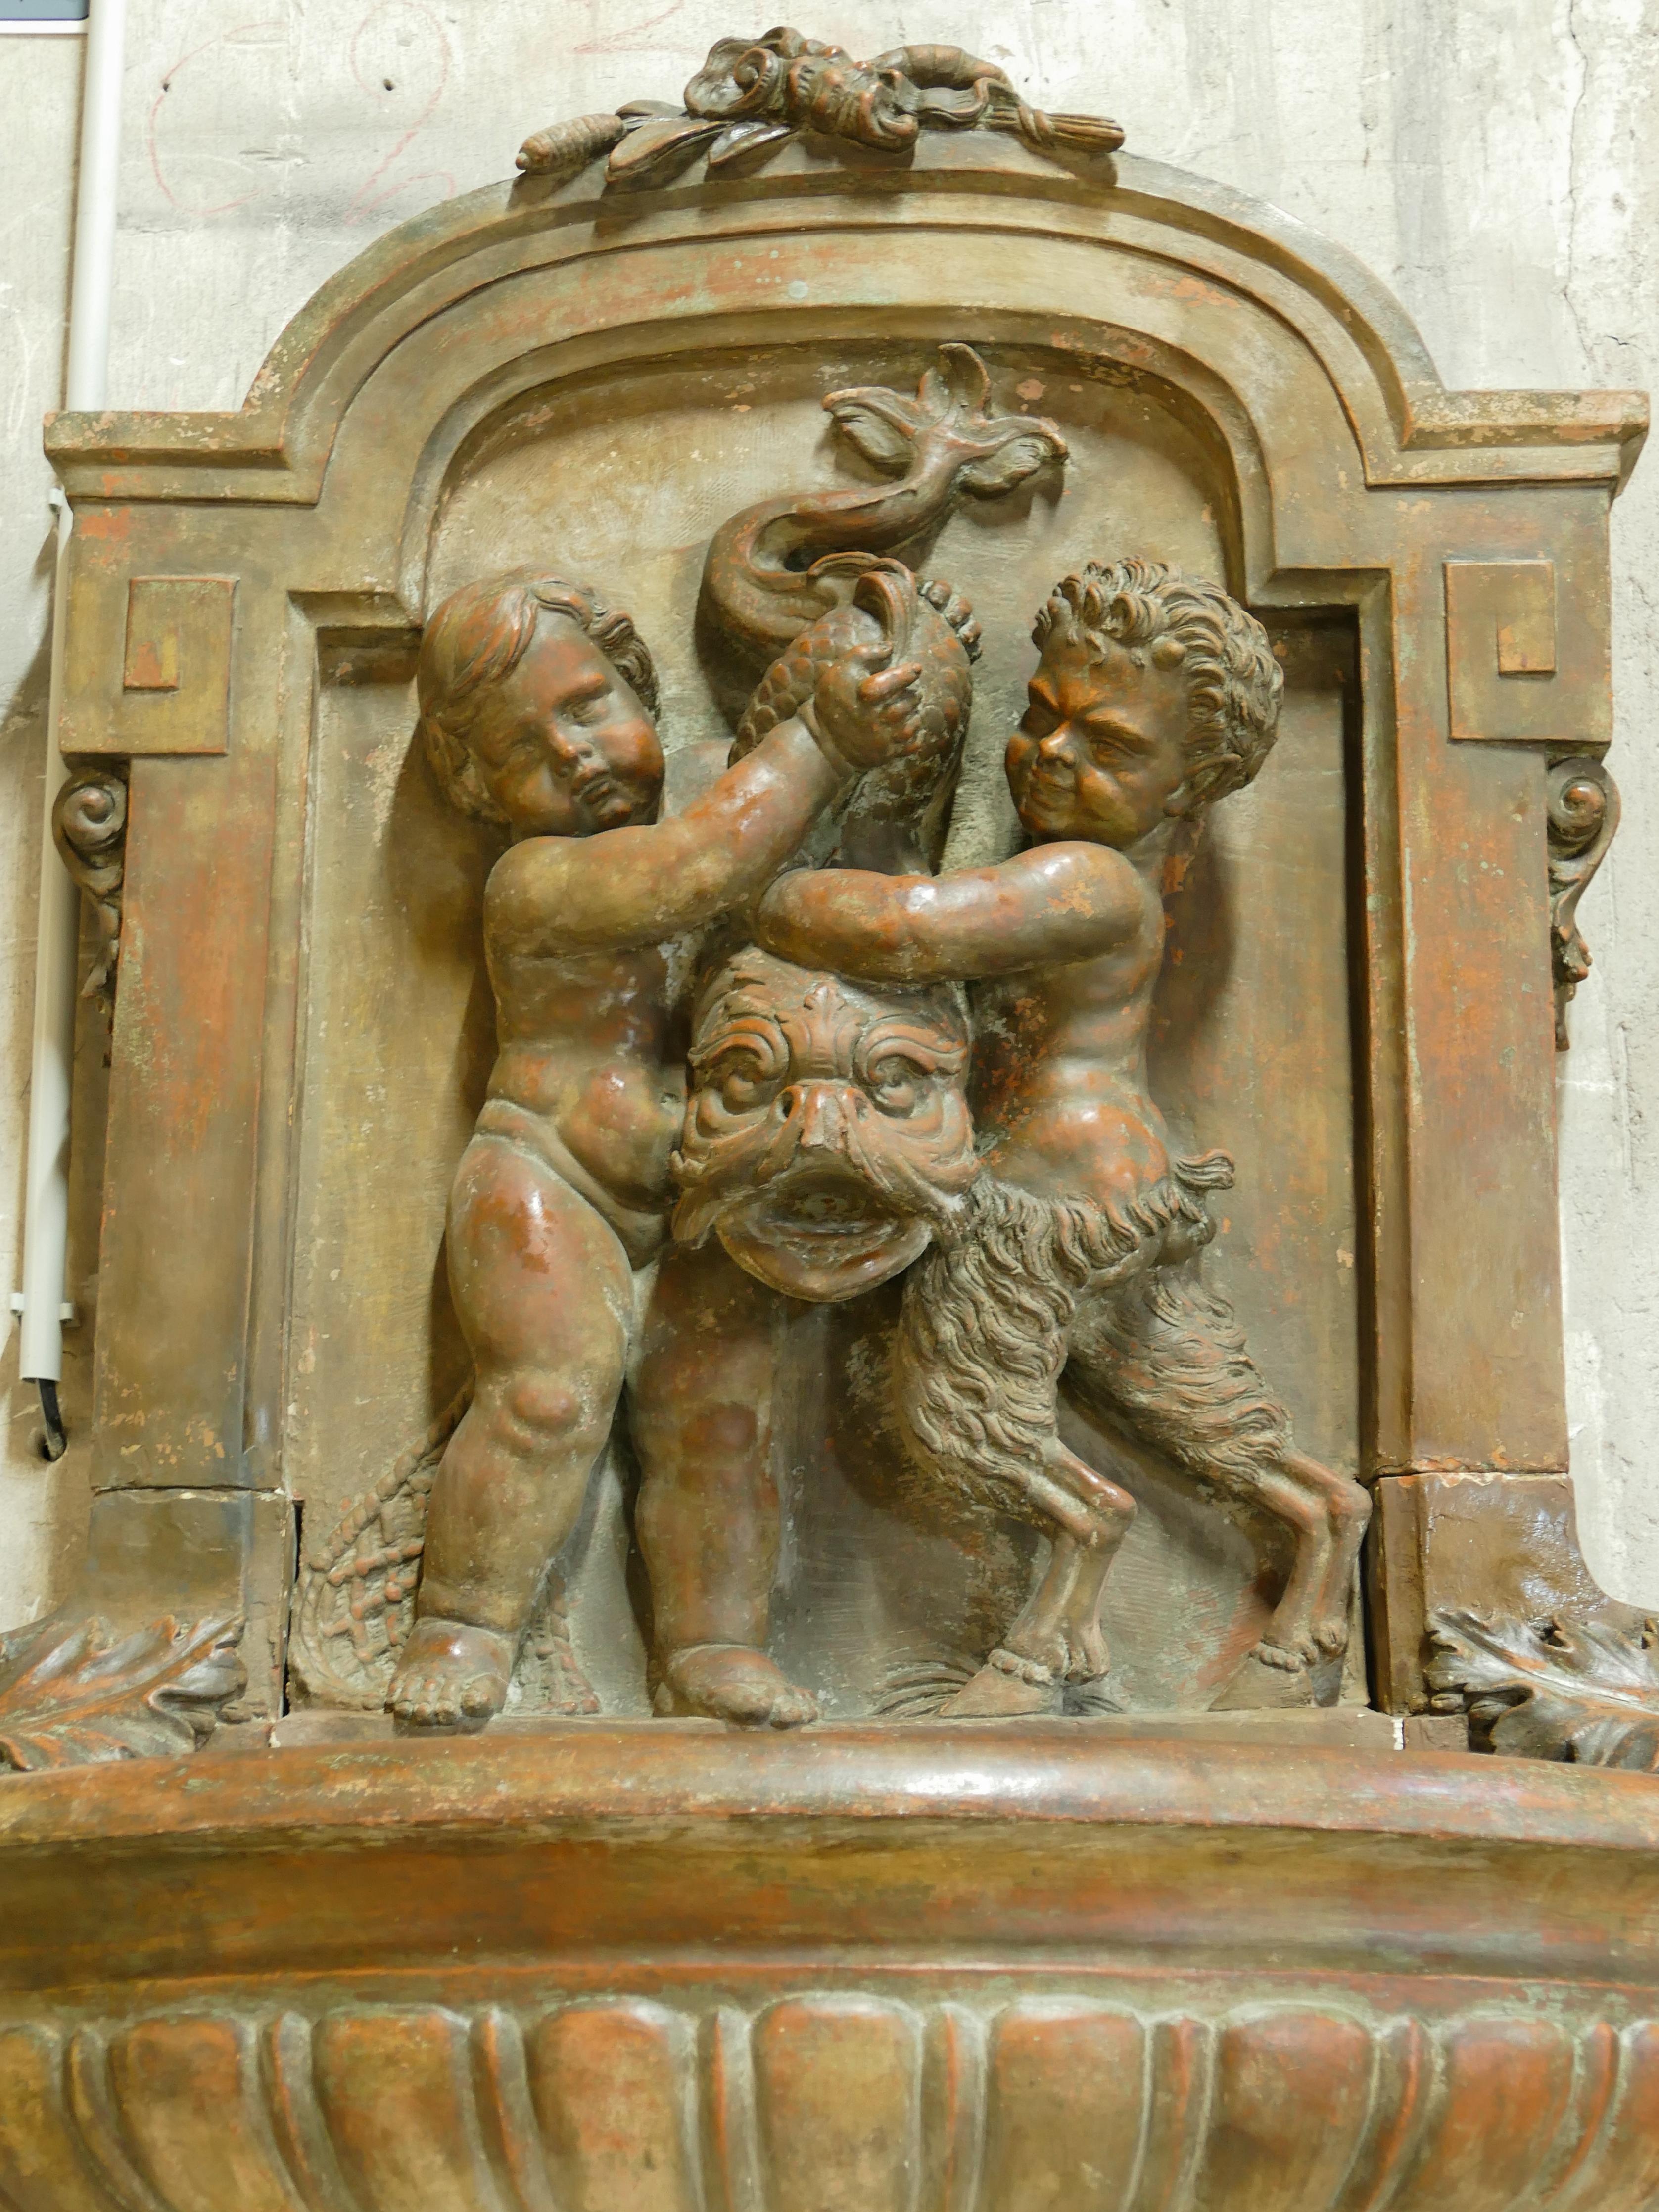 Late 18th century terracotta decorative fountain with sculptures of a child and faun 